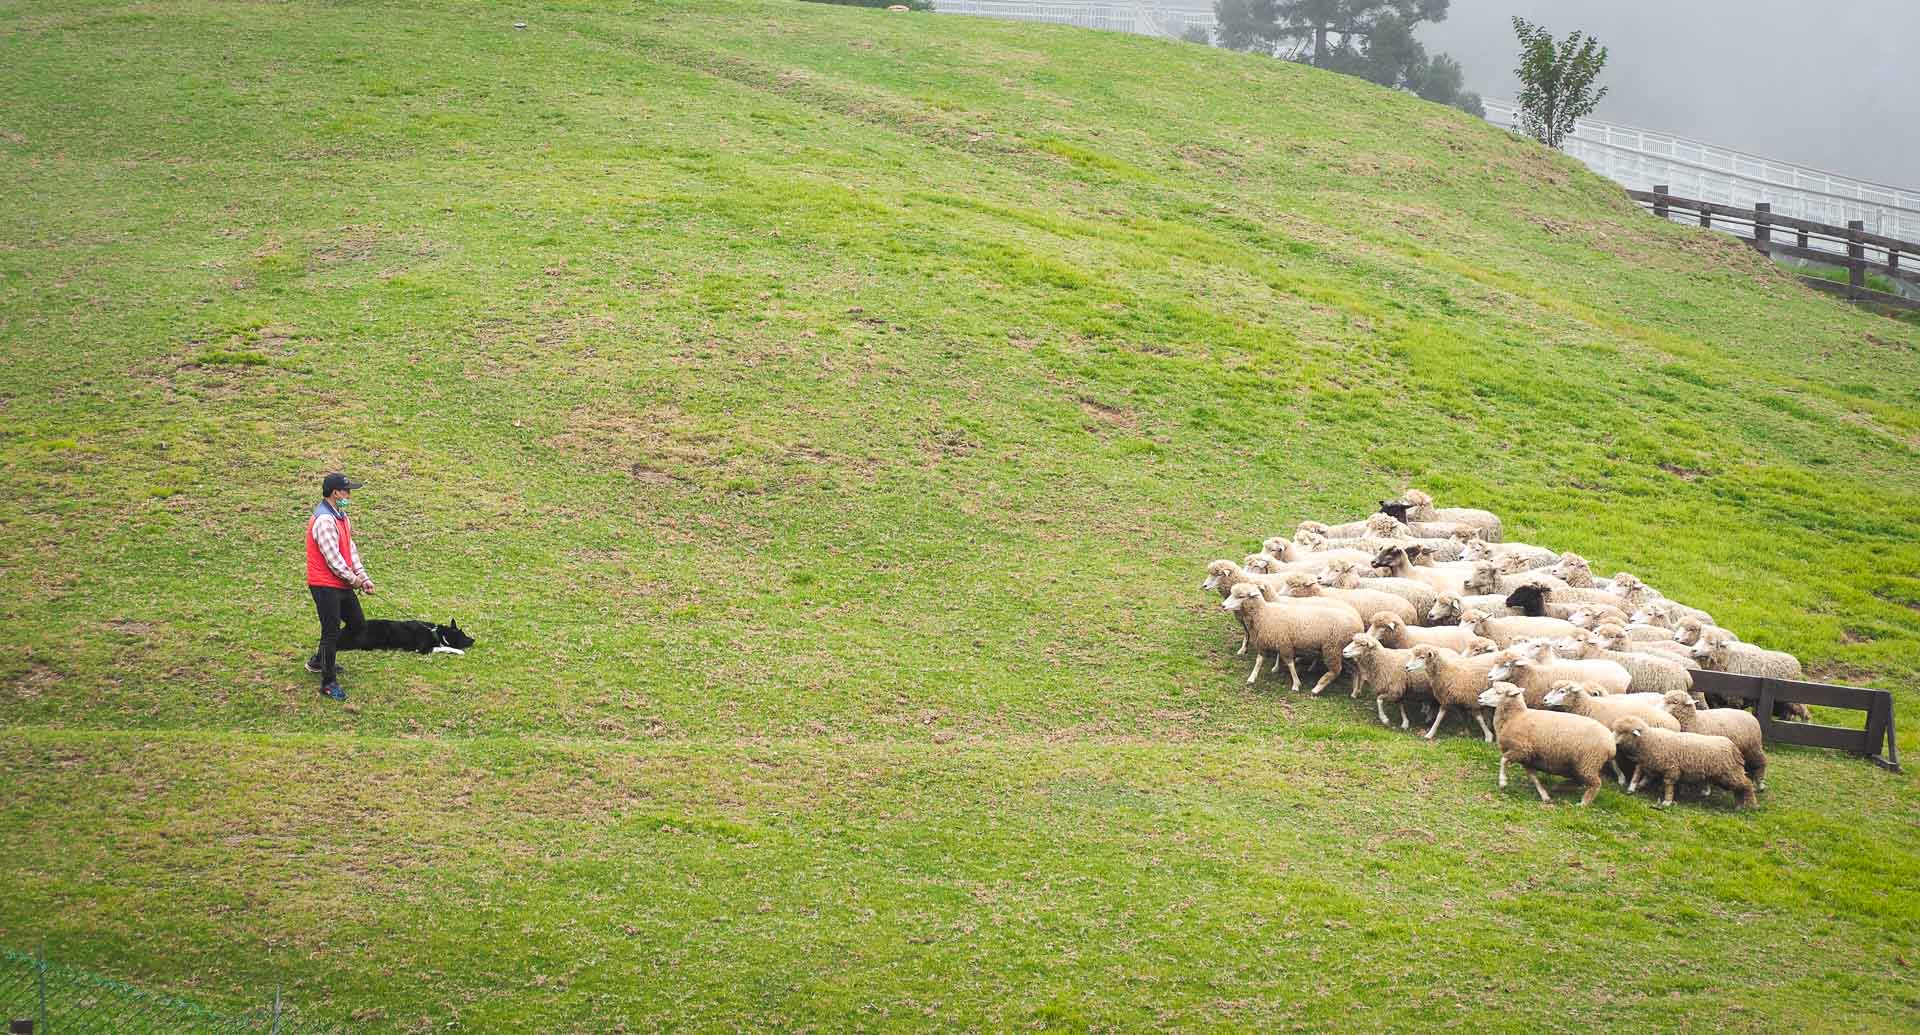 A shepherd and sheep top face a herd of sheep on a grassy hill